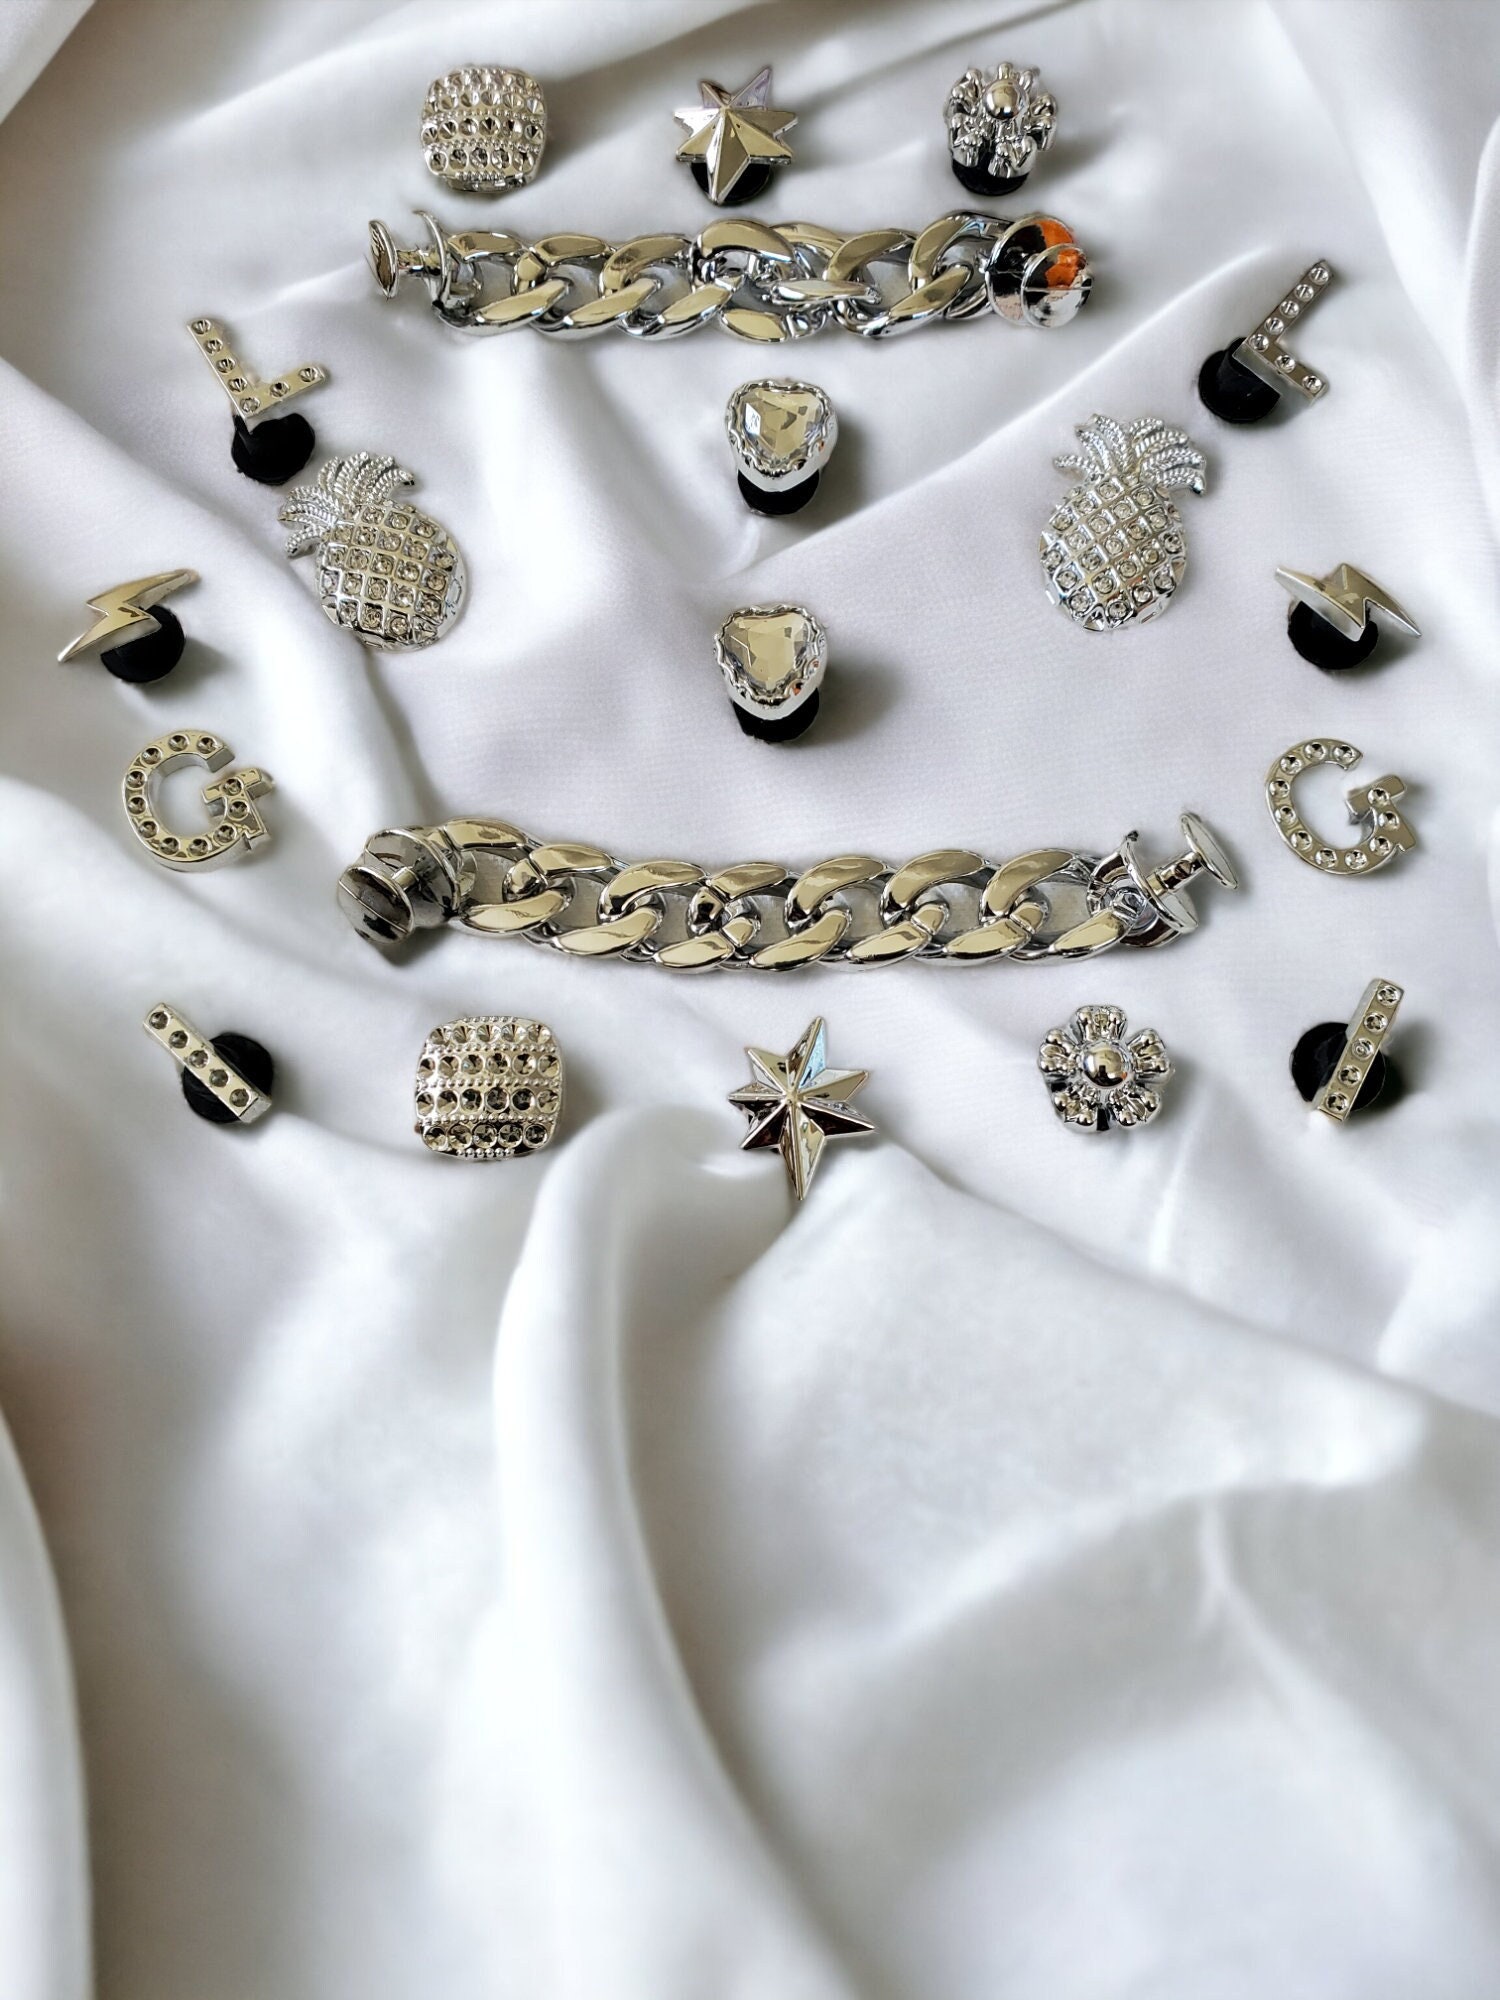 26 Pieces Bling Croc Charms, Luxury Rhinestones Chromic & Gold Color  and Shapes